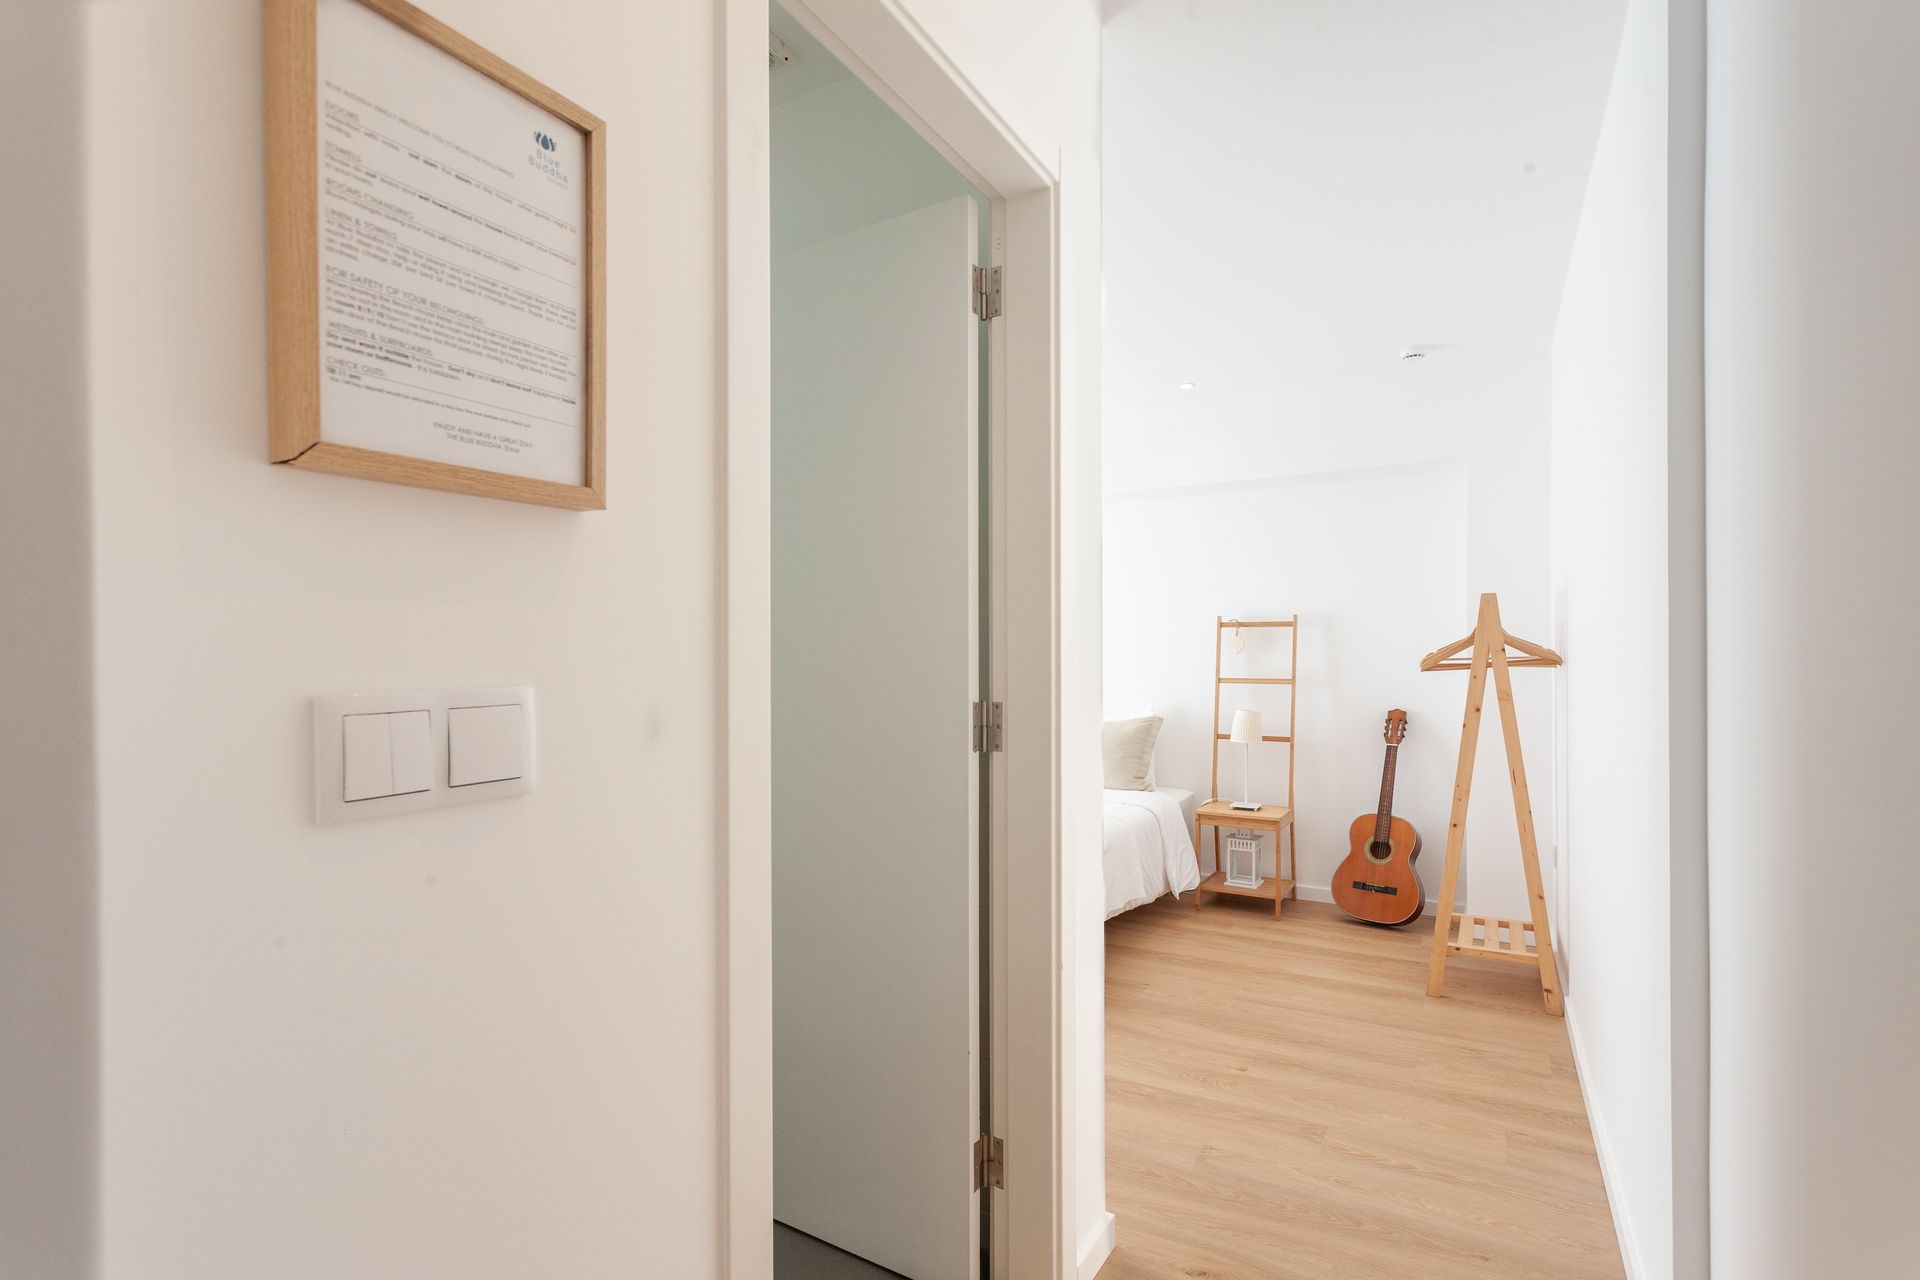 a hallway leading to a bedroom with a guitar on the wall .